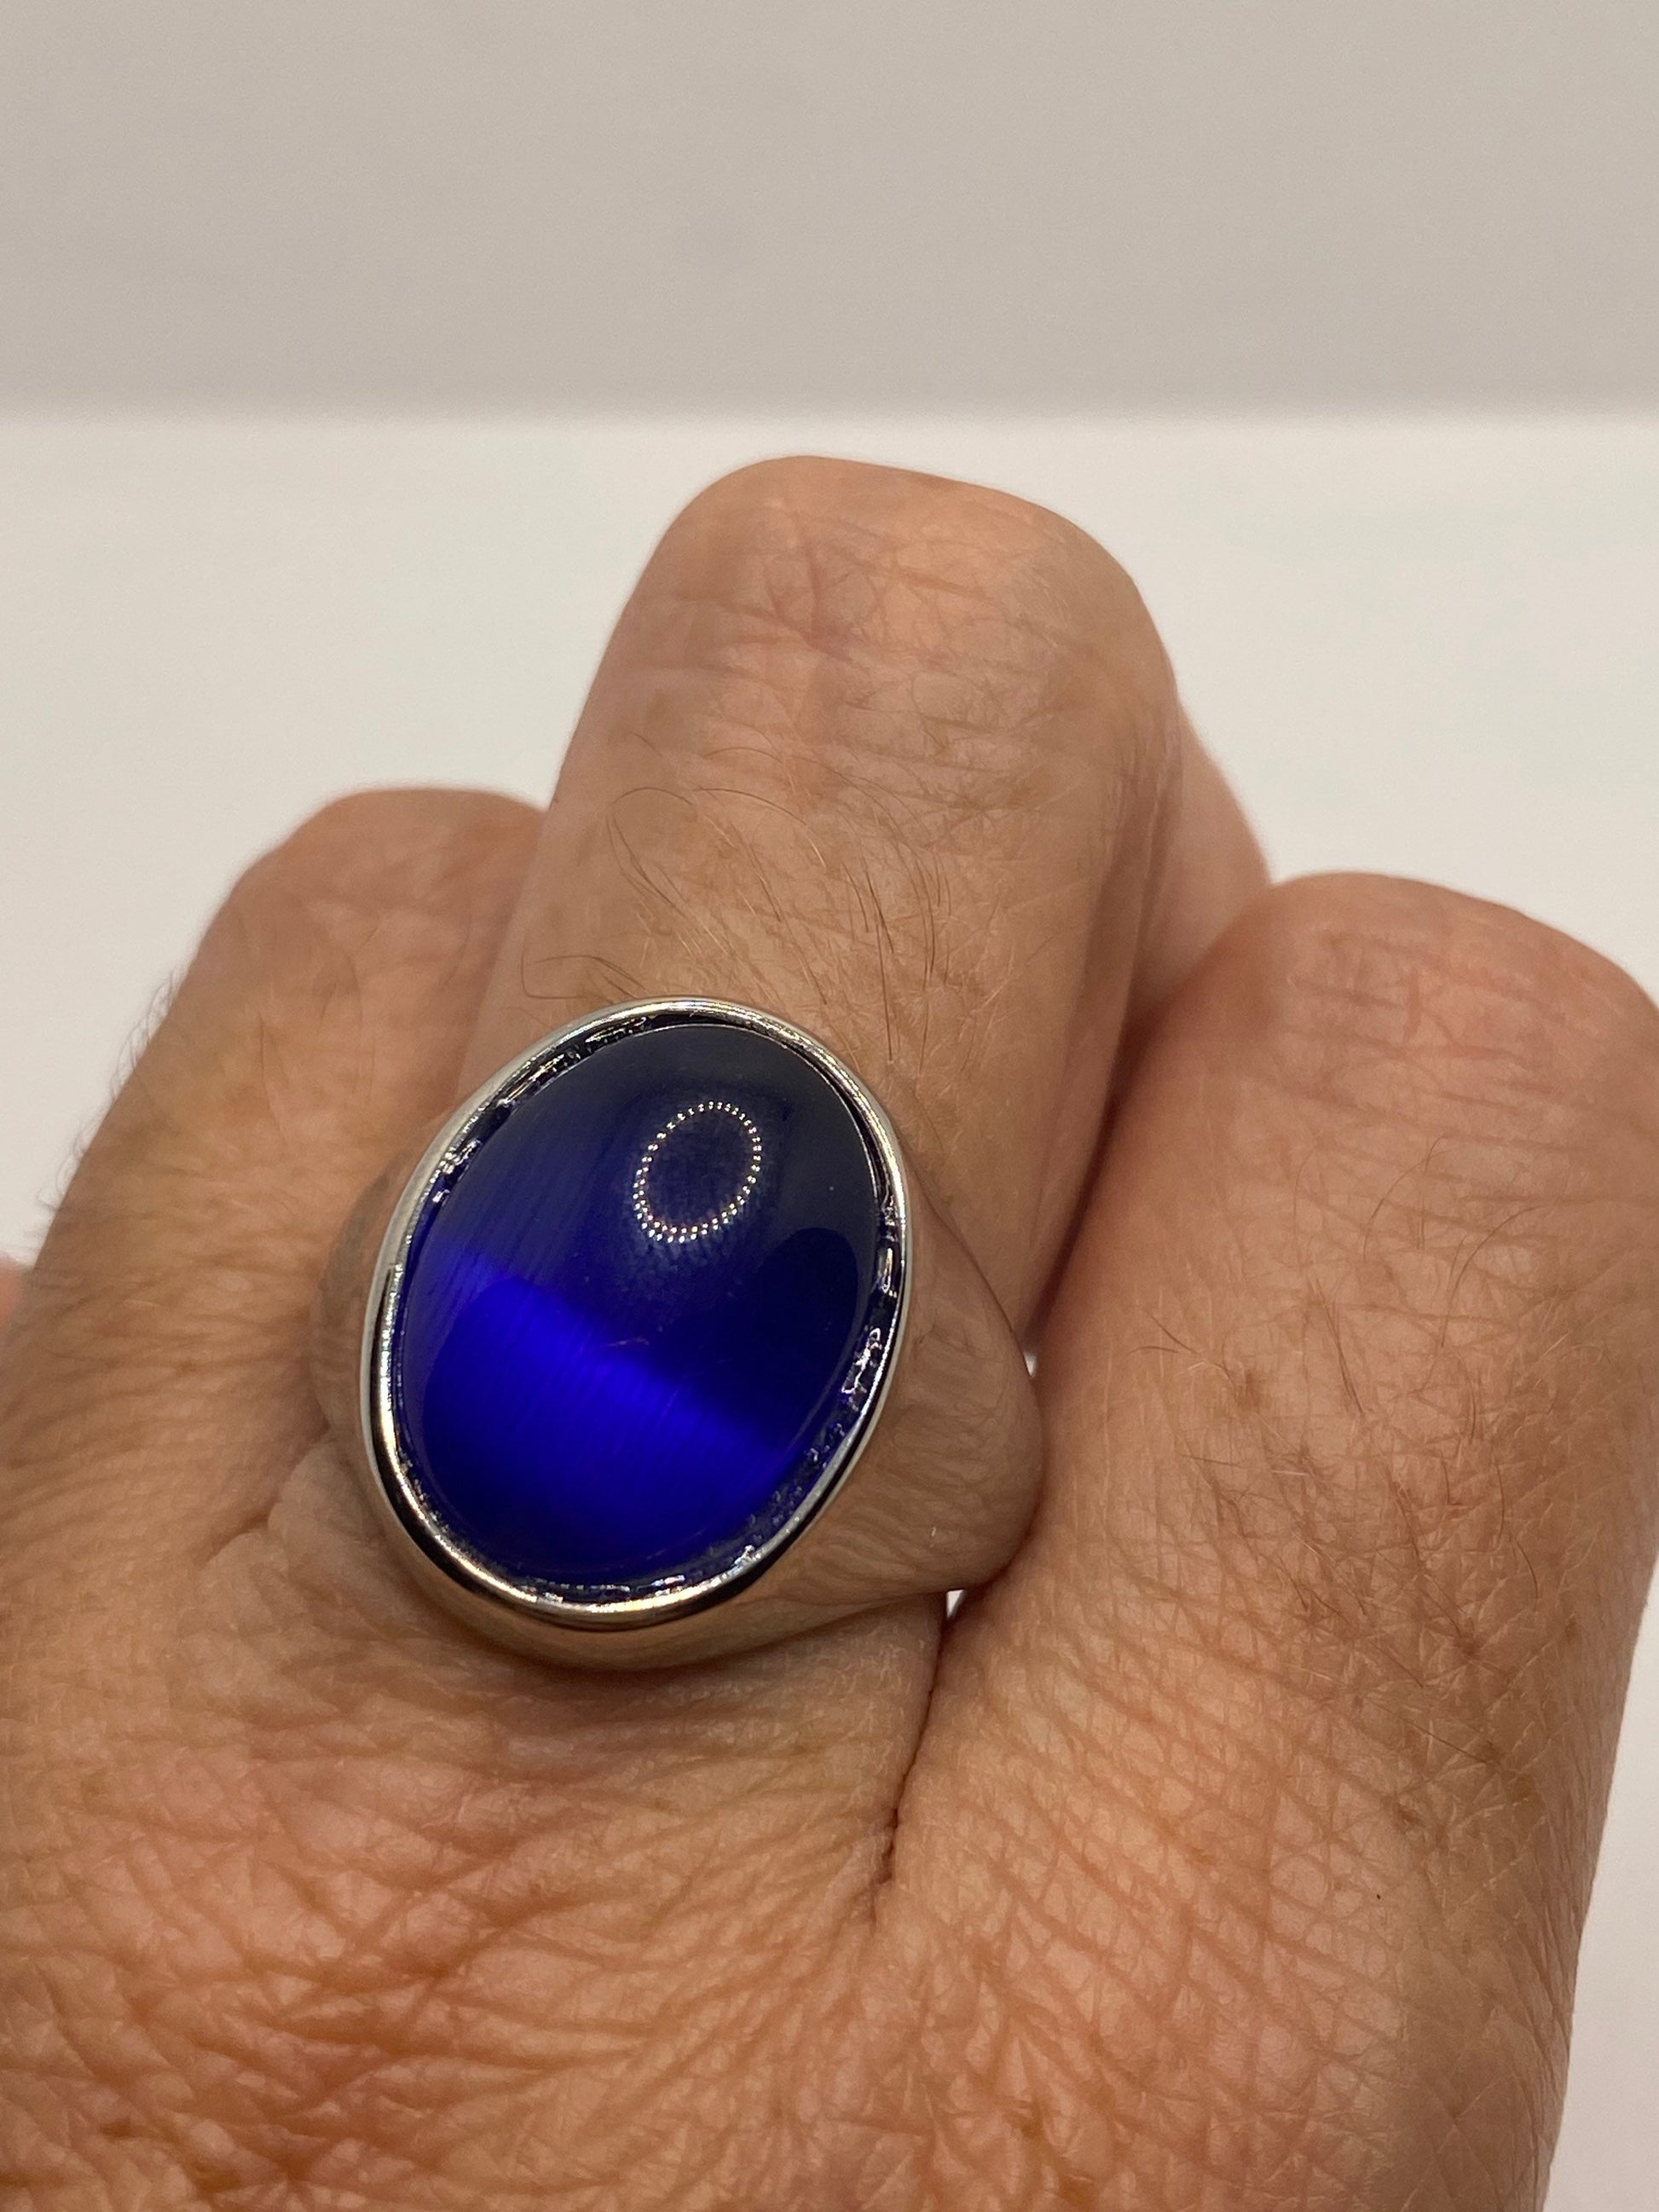 Vintage Blue Cats Eye Glass Mens Ring Stainless Steel